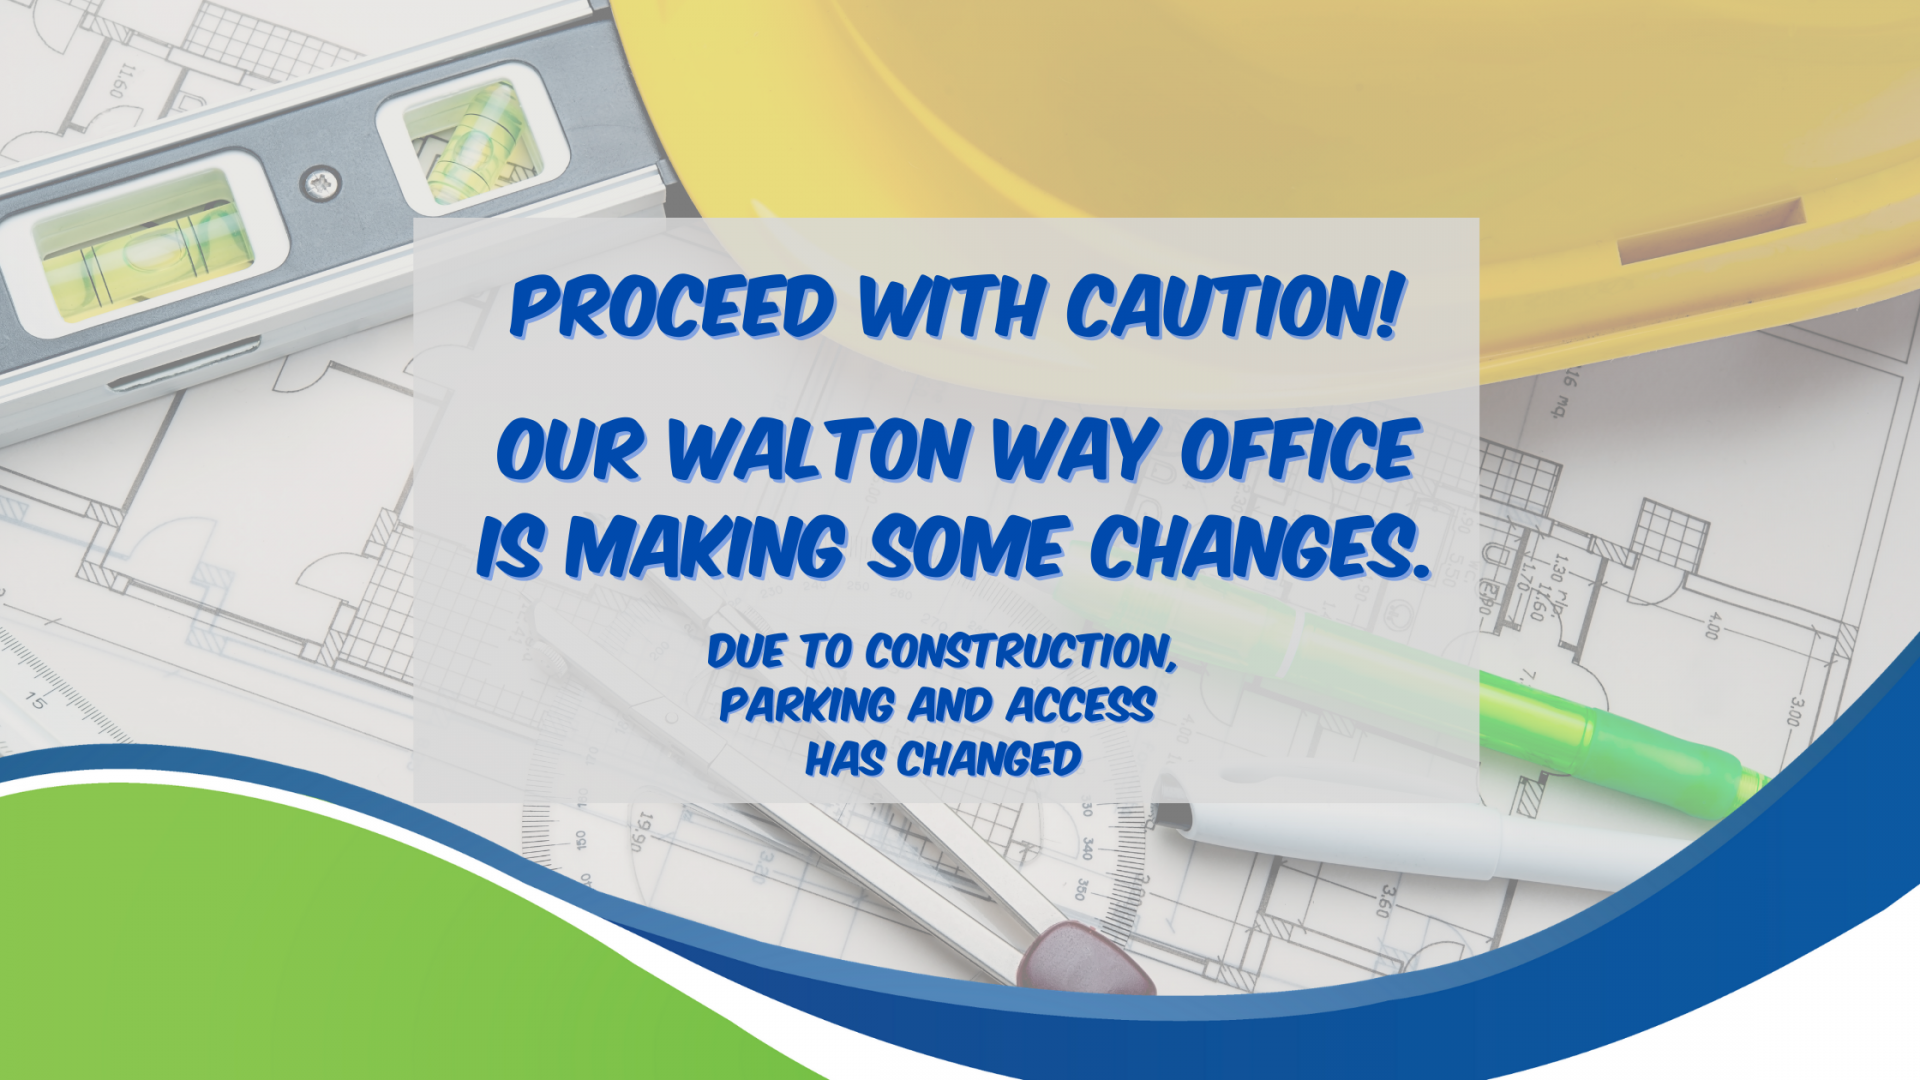 Image of construction hat and floor plans, reads, "Proceed with caution! Our Walton Way Office is Making Some Changes. Due to construction, parking and access has changed."